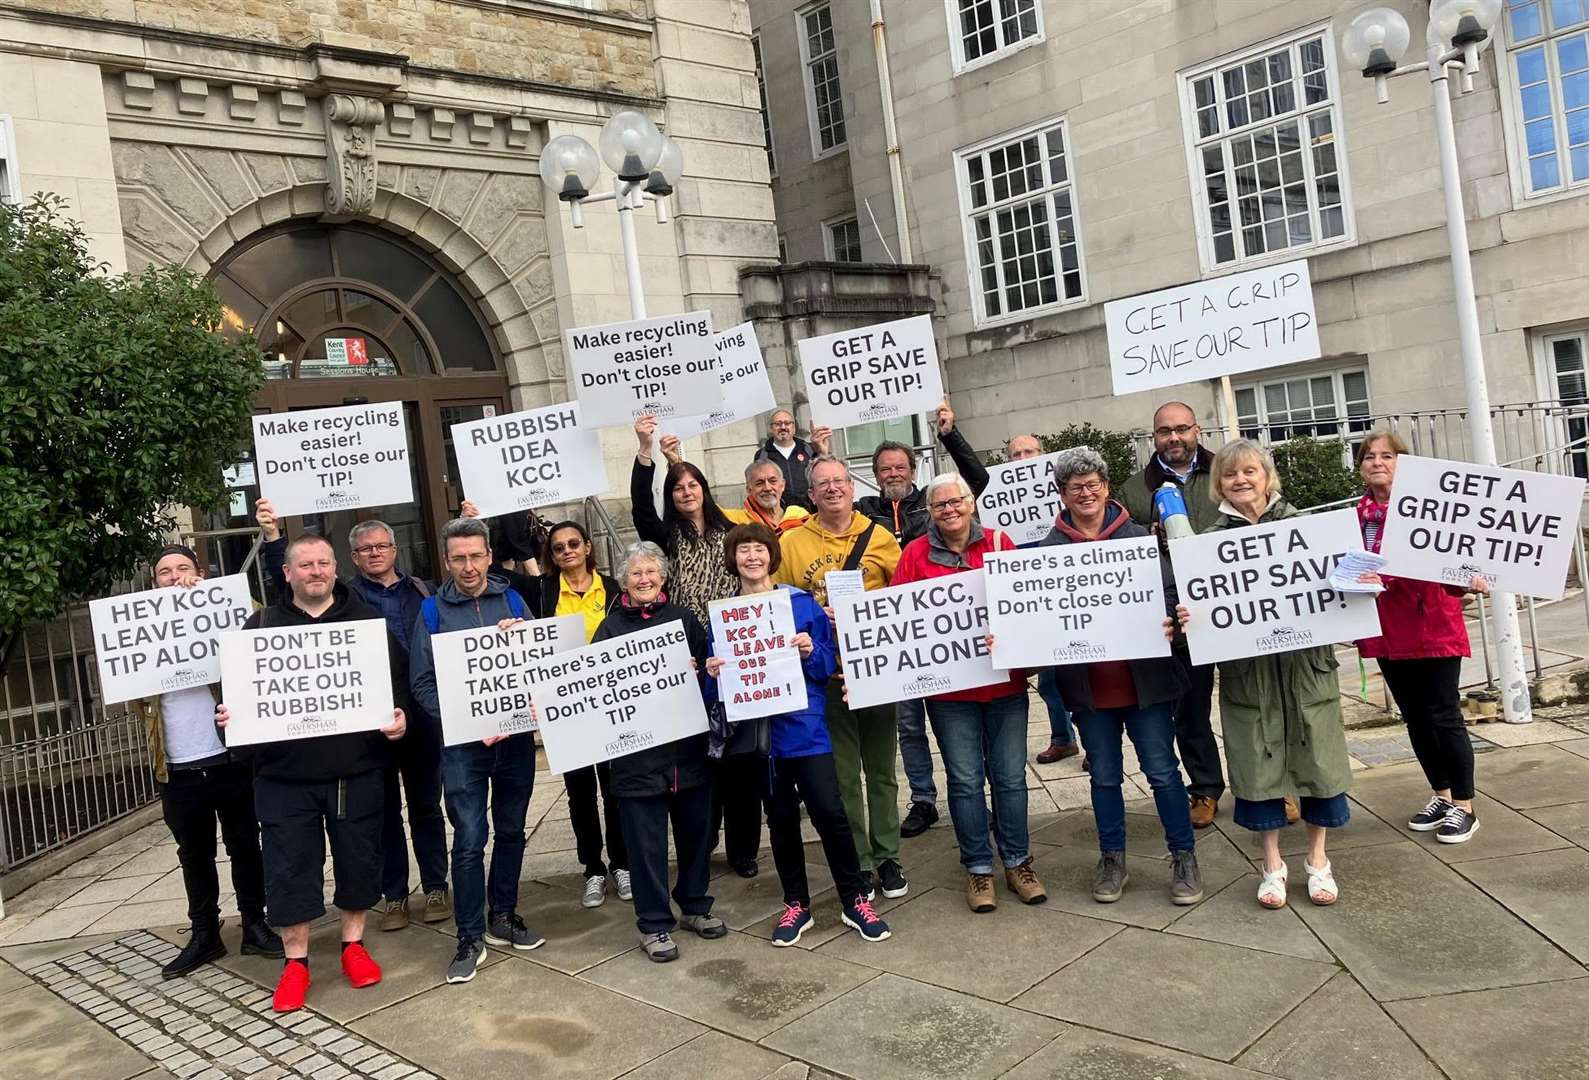 Protests about plans to close Kent County Council recycling centres were held outside County Hall in Maidstone. Photo: Simon Finlay